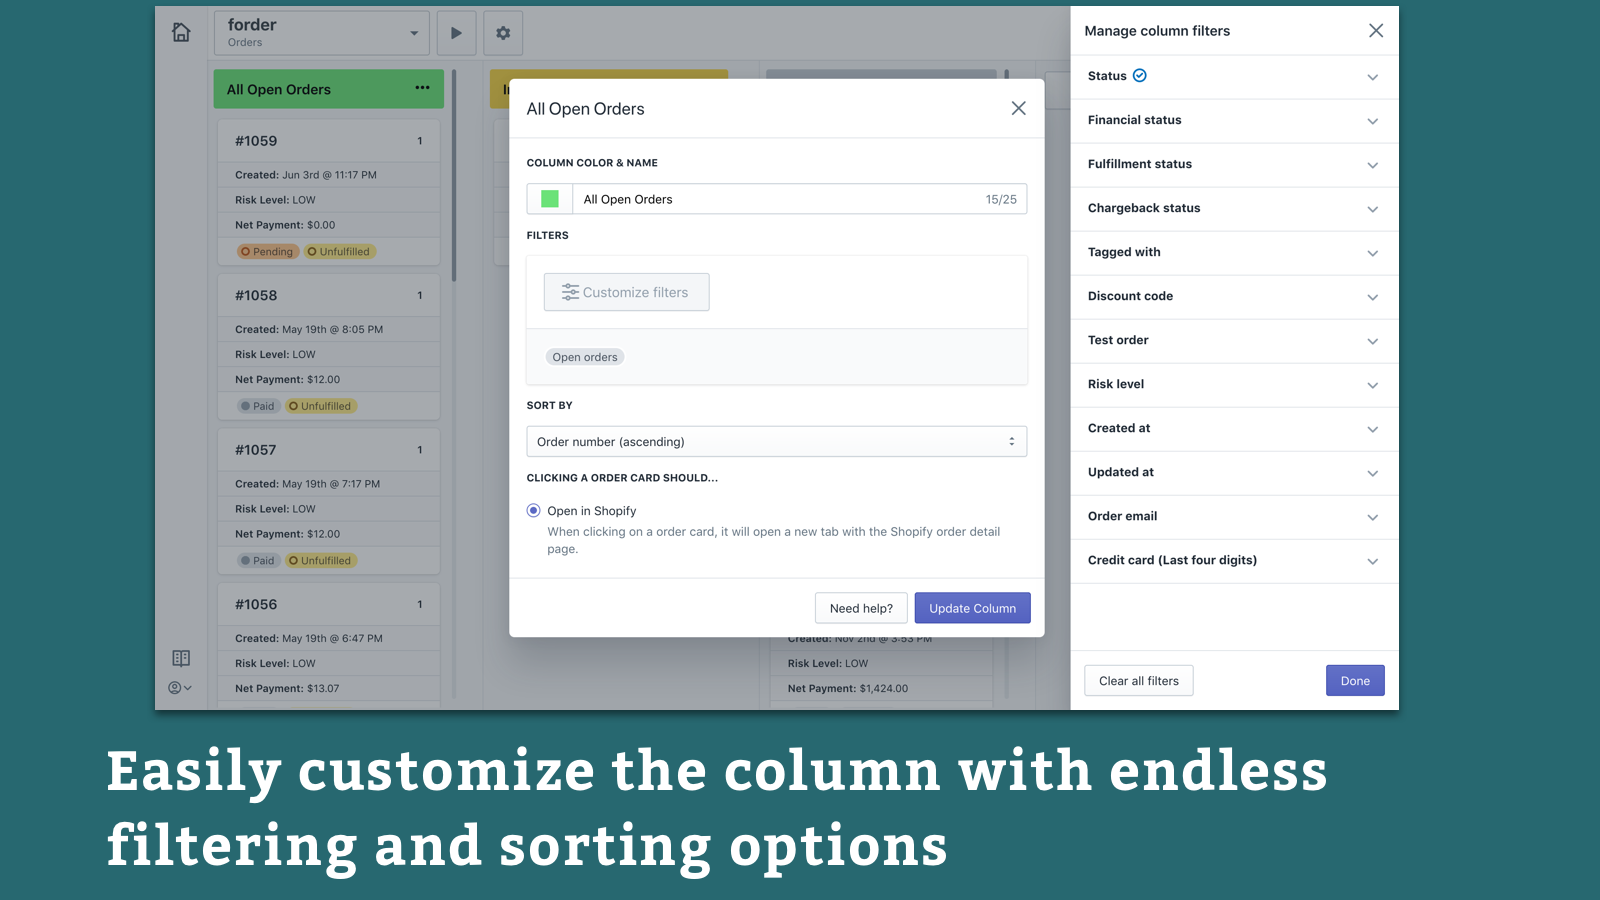 Easily customize column filters & sorting options